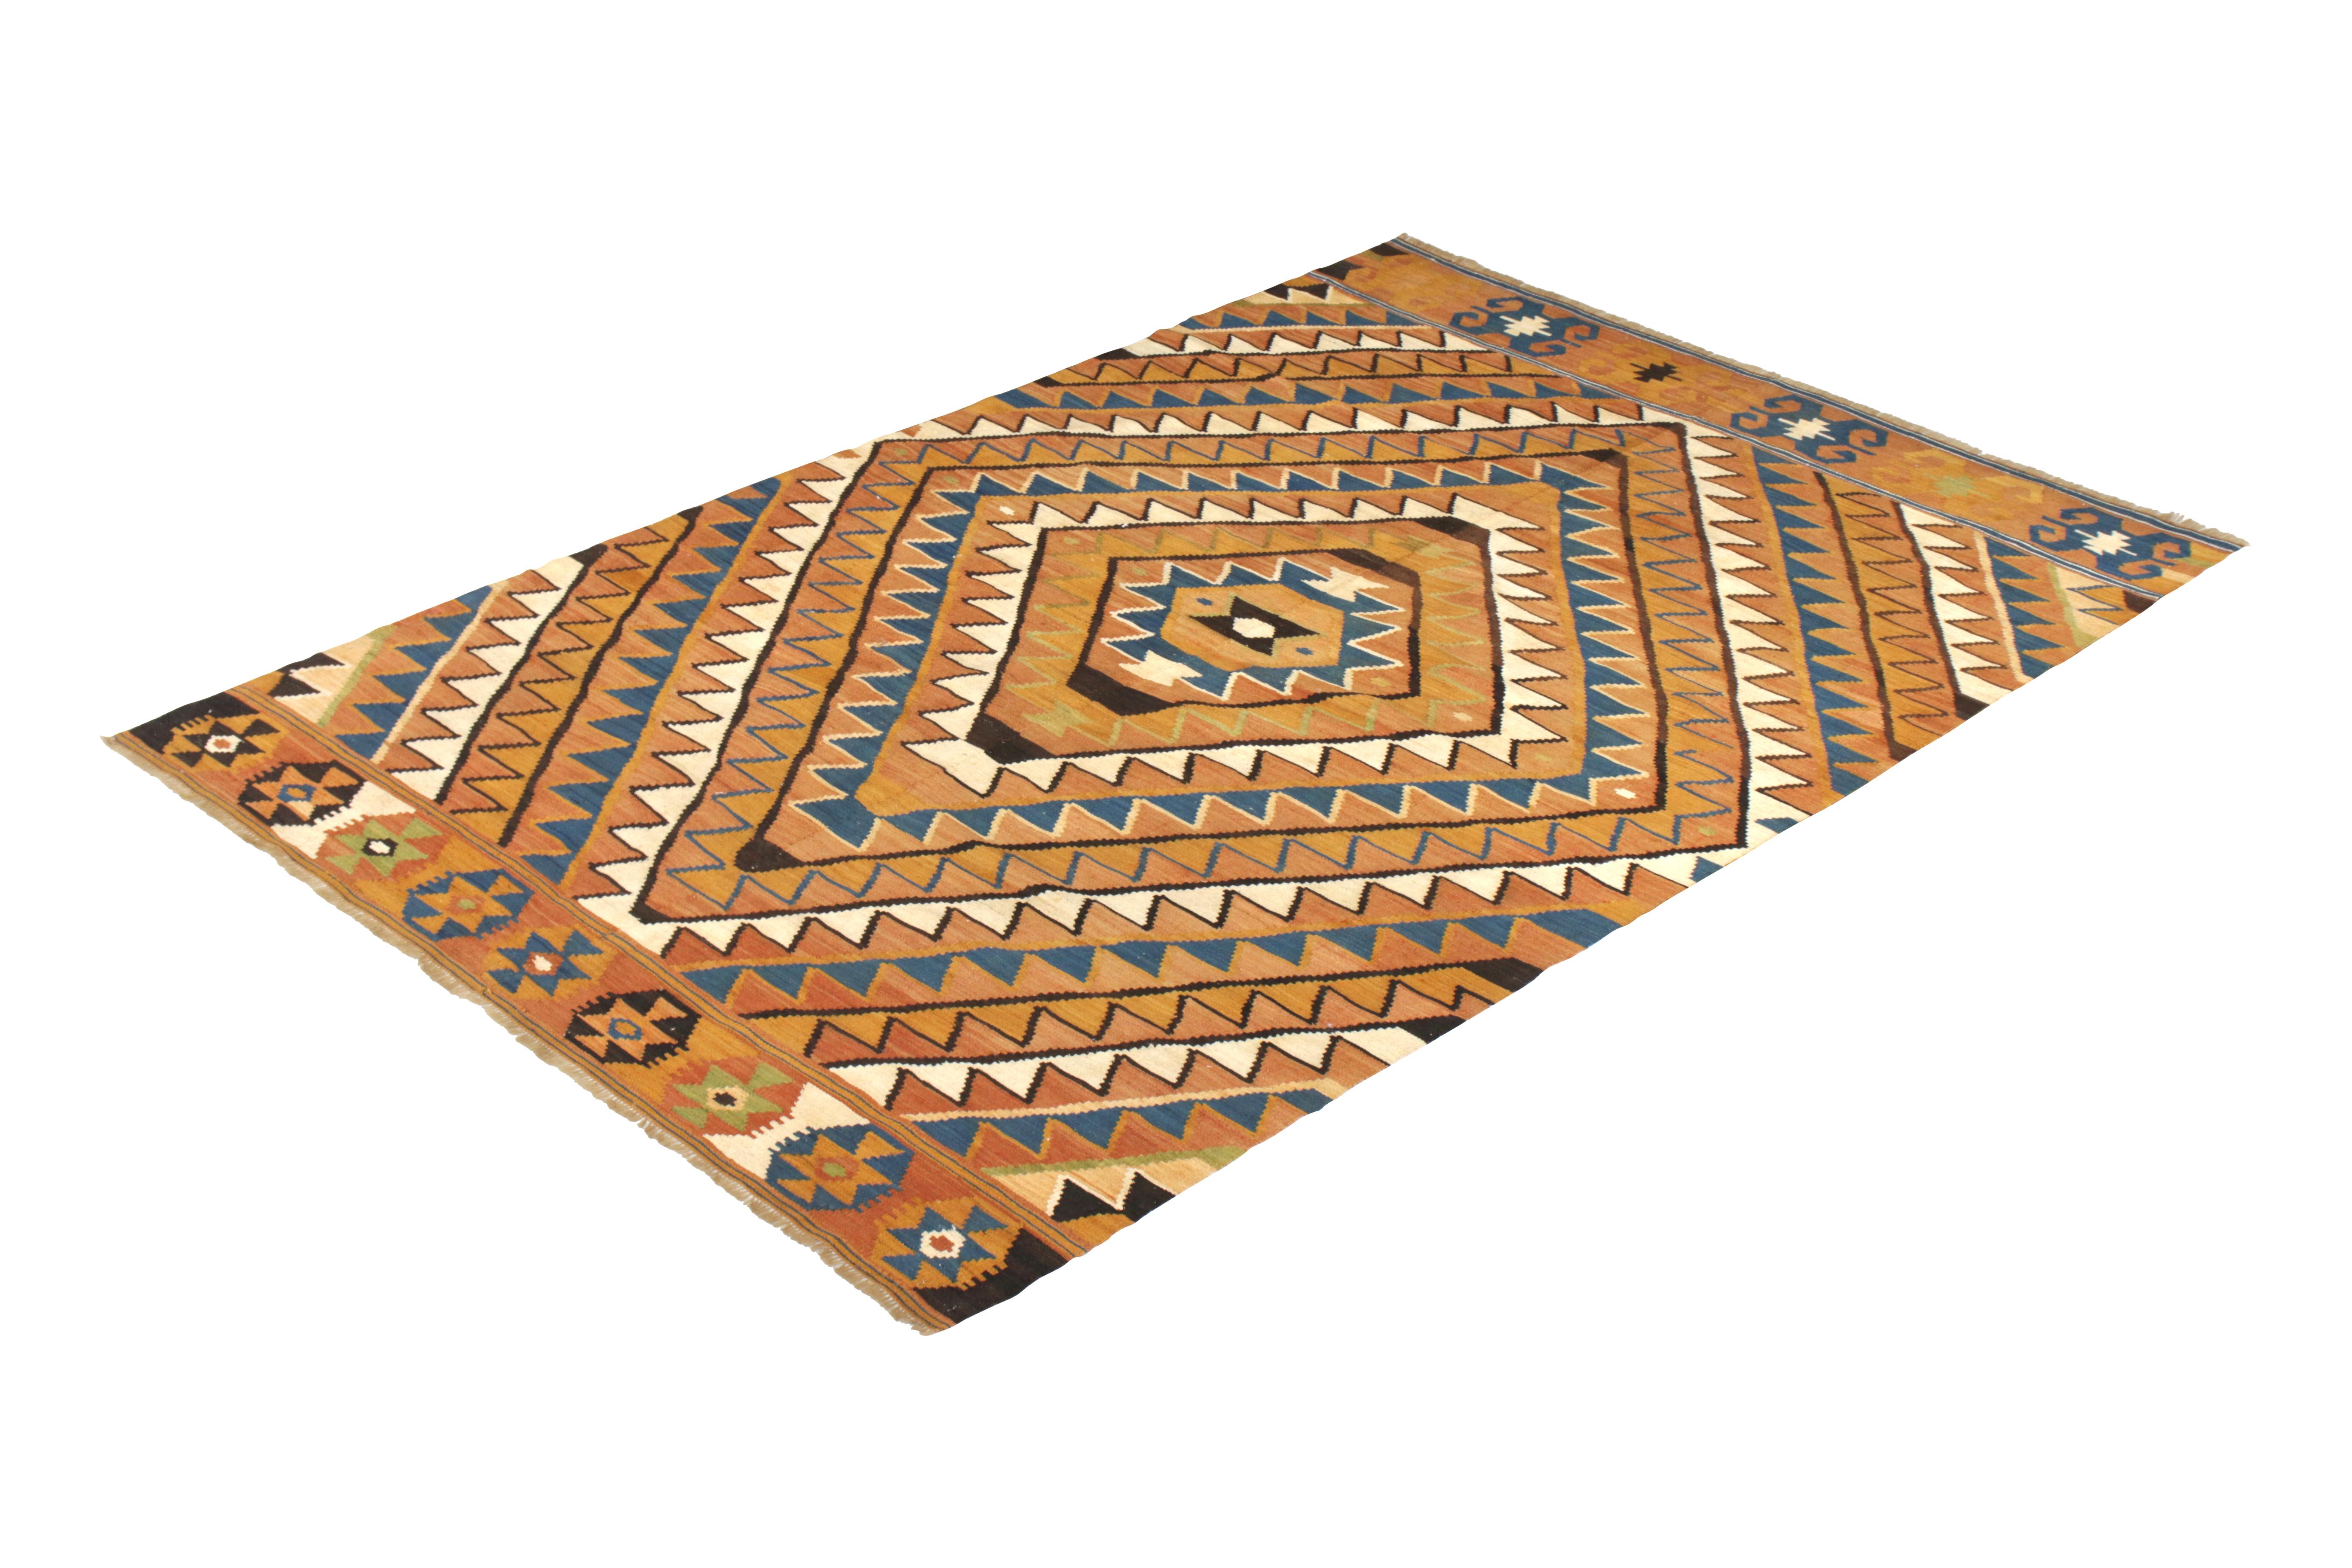 Handwoven in a wool flat-weave originating from Turkey circa 1950-1960, this vintage Kilim rug enjoys an uncommon play of rare colors, namely the prevailing gold and rust orange hues against blue and white in the all-over geometric pattern. Further